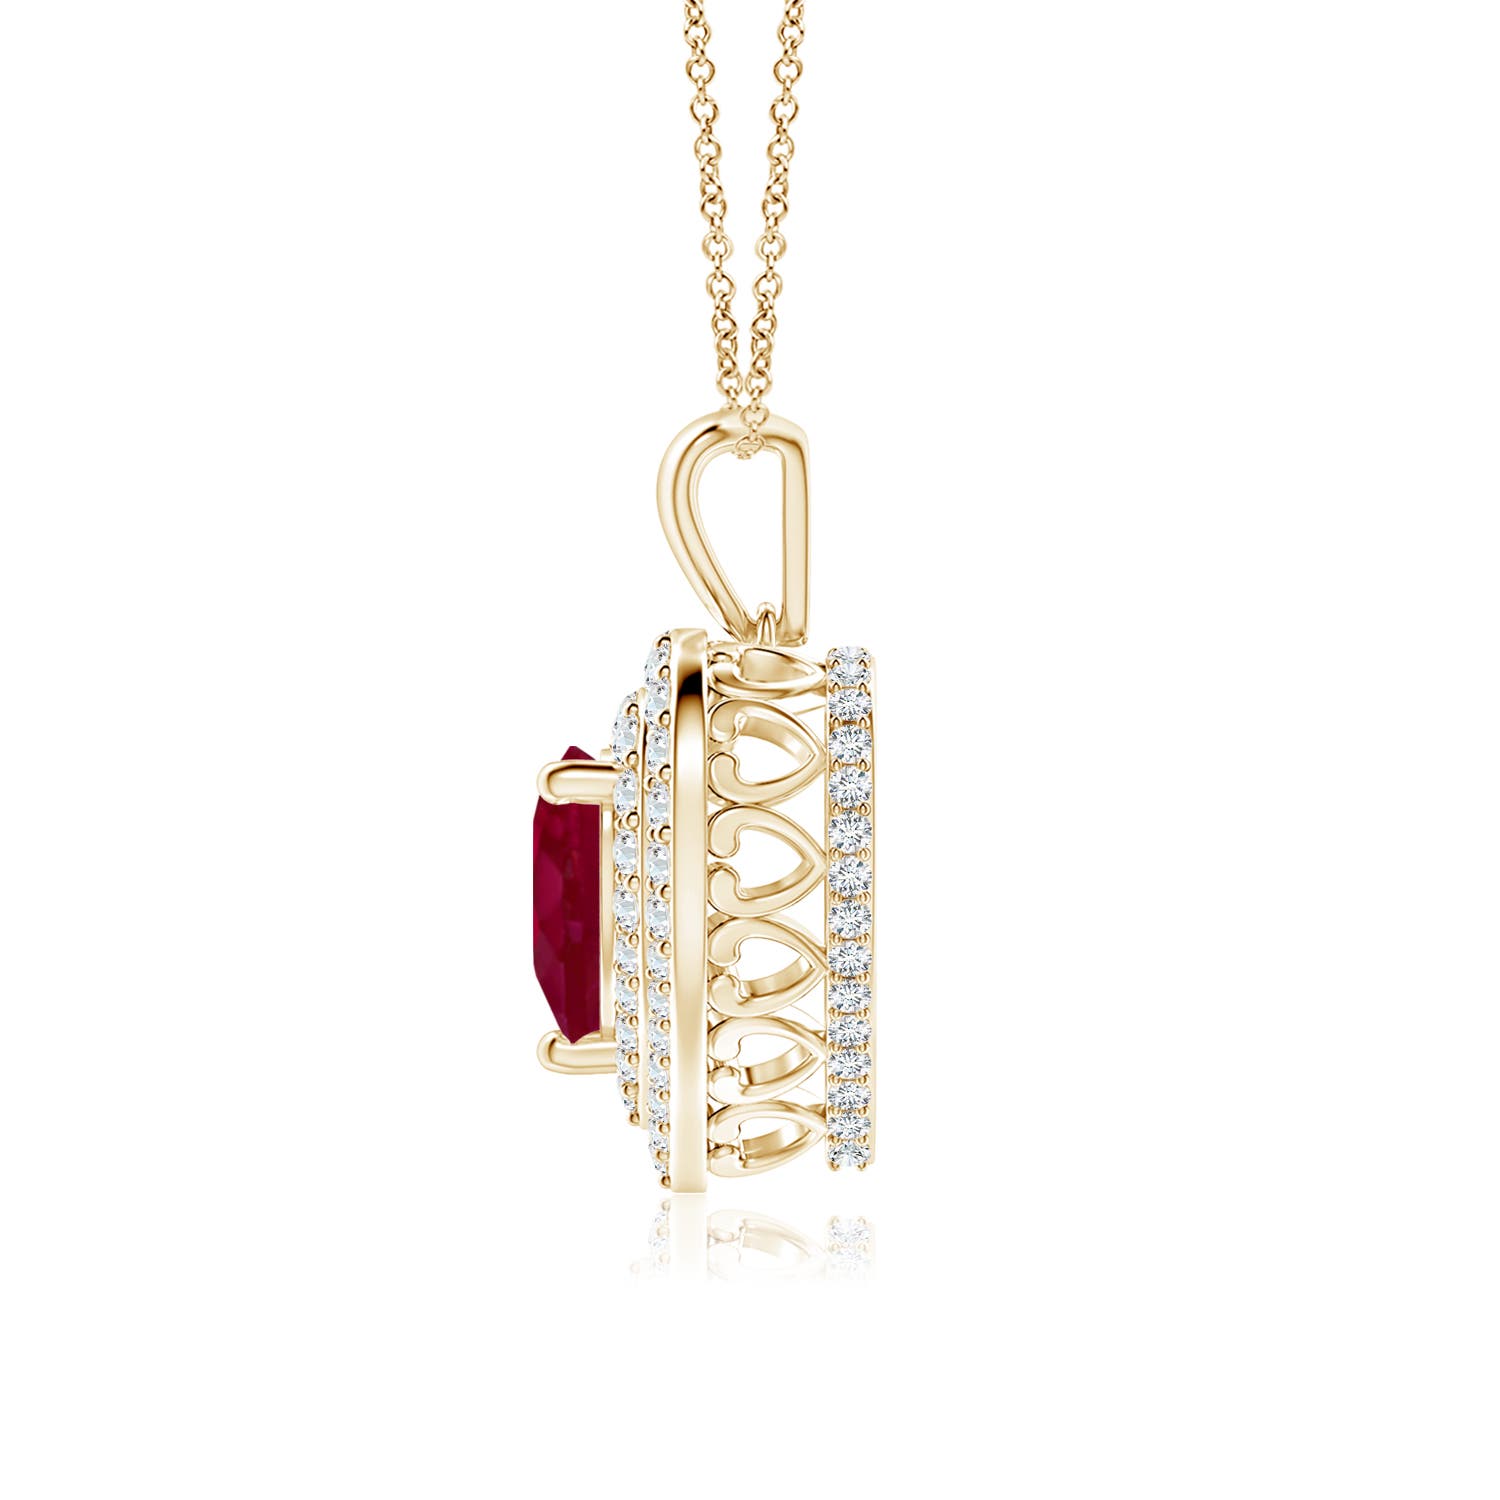 A - Ruby / 2.08 CT / 14 KT Yellow Gold